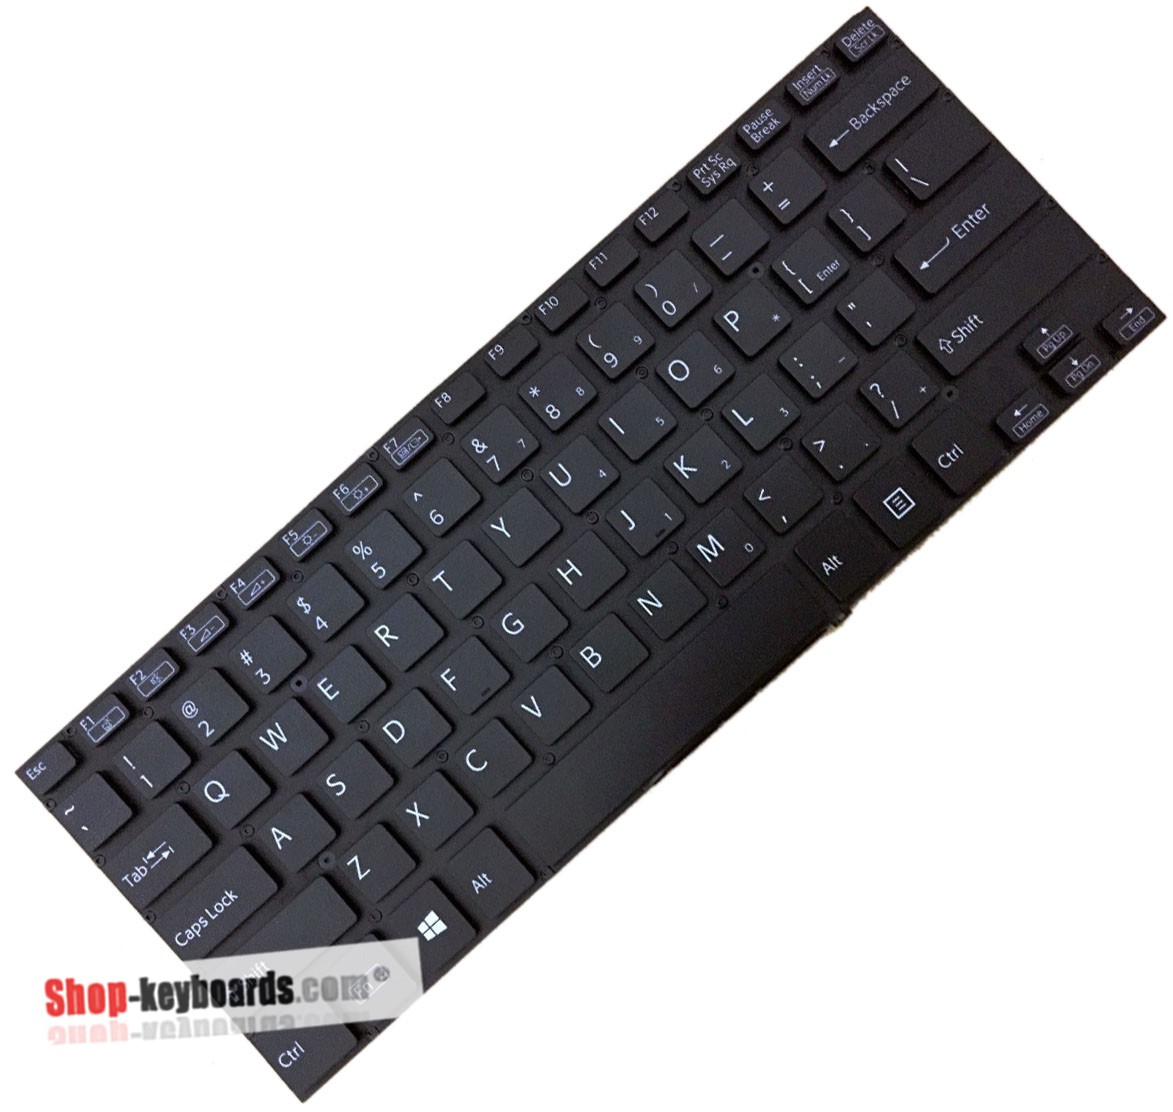 Sony VAIO SVF14A1A1J Keyboard replacement